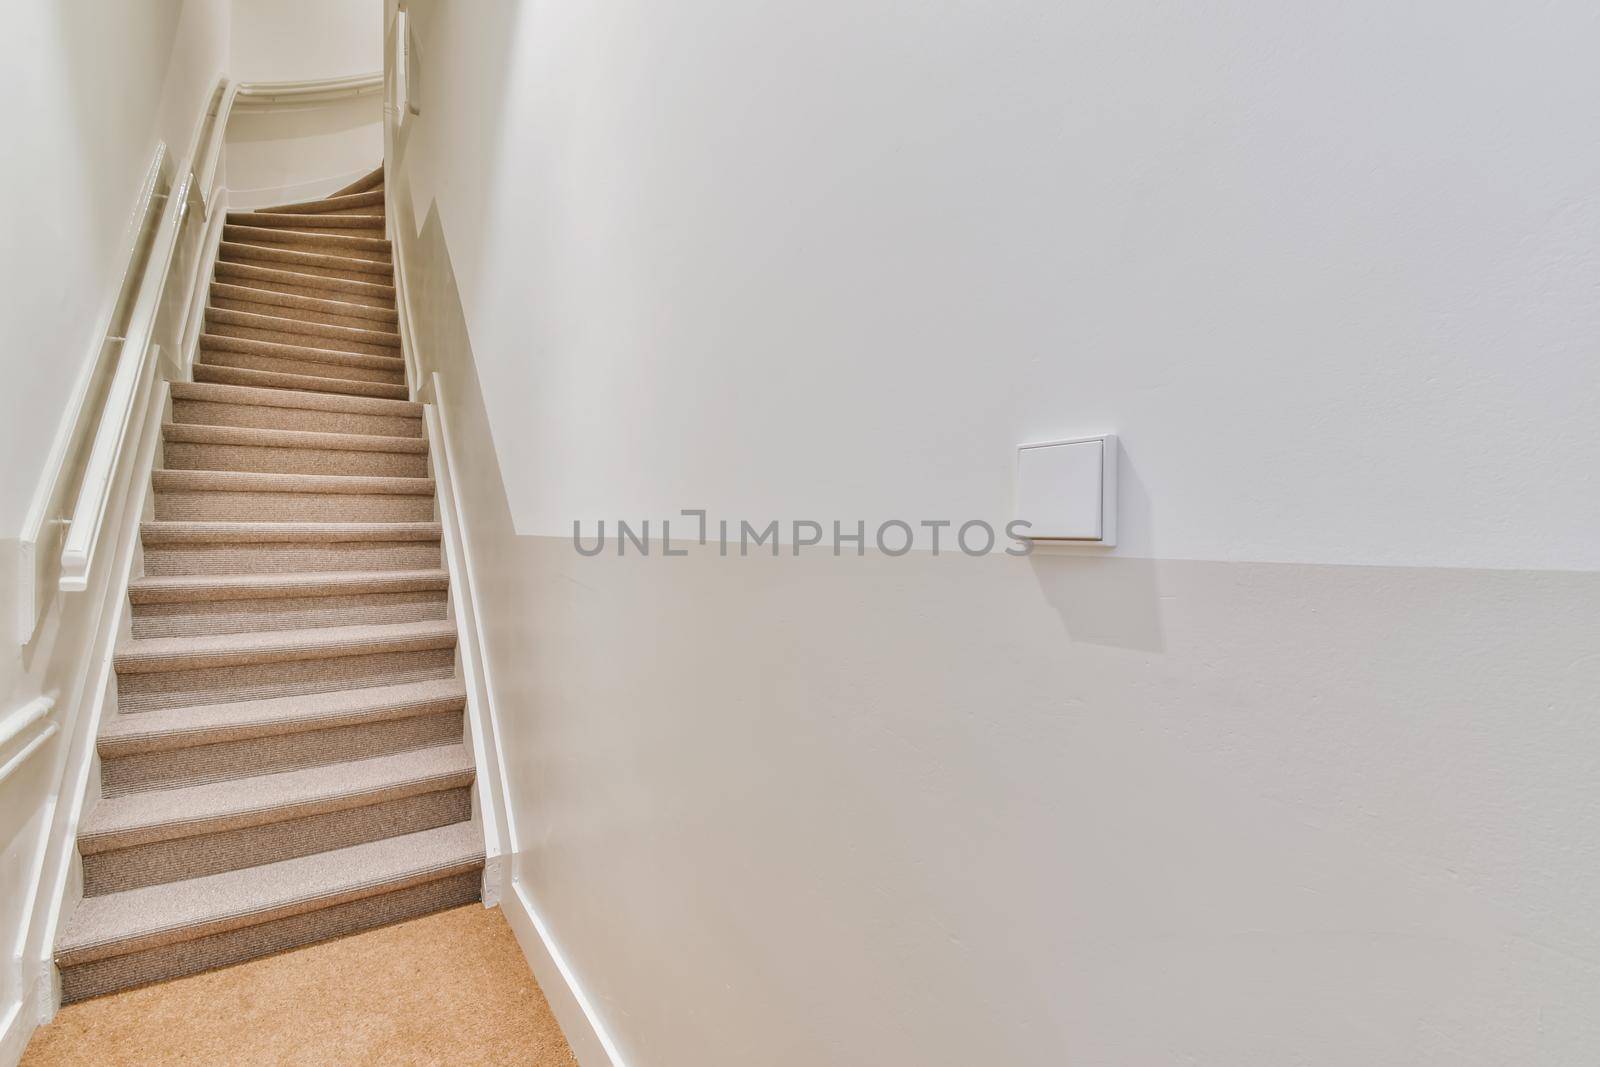 A convenient staircase leading to the top